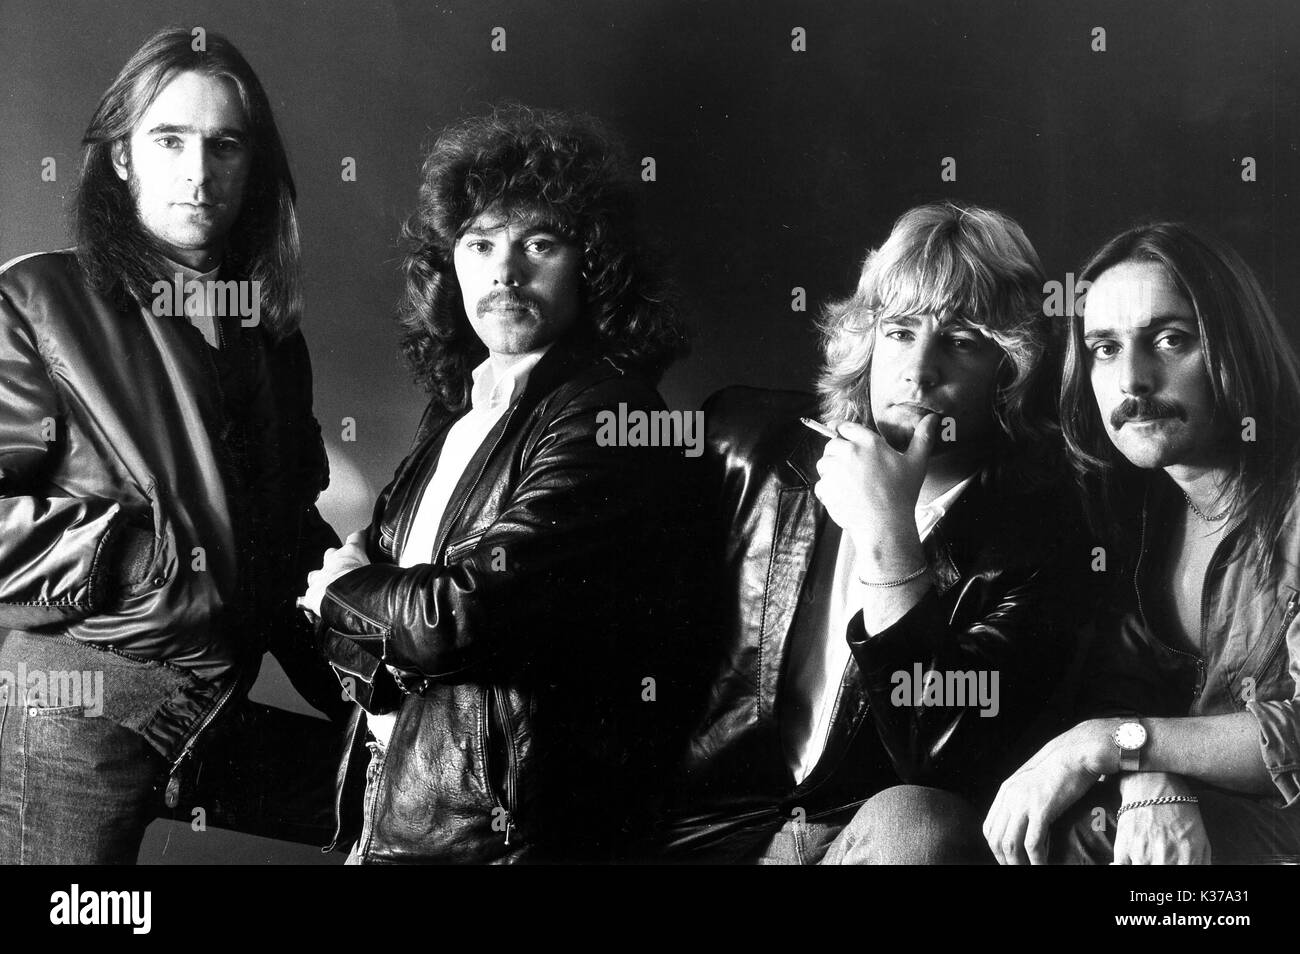 The status quo hi-res stock and images - Alamy photography